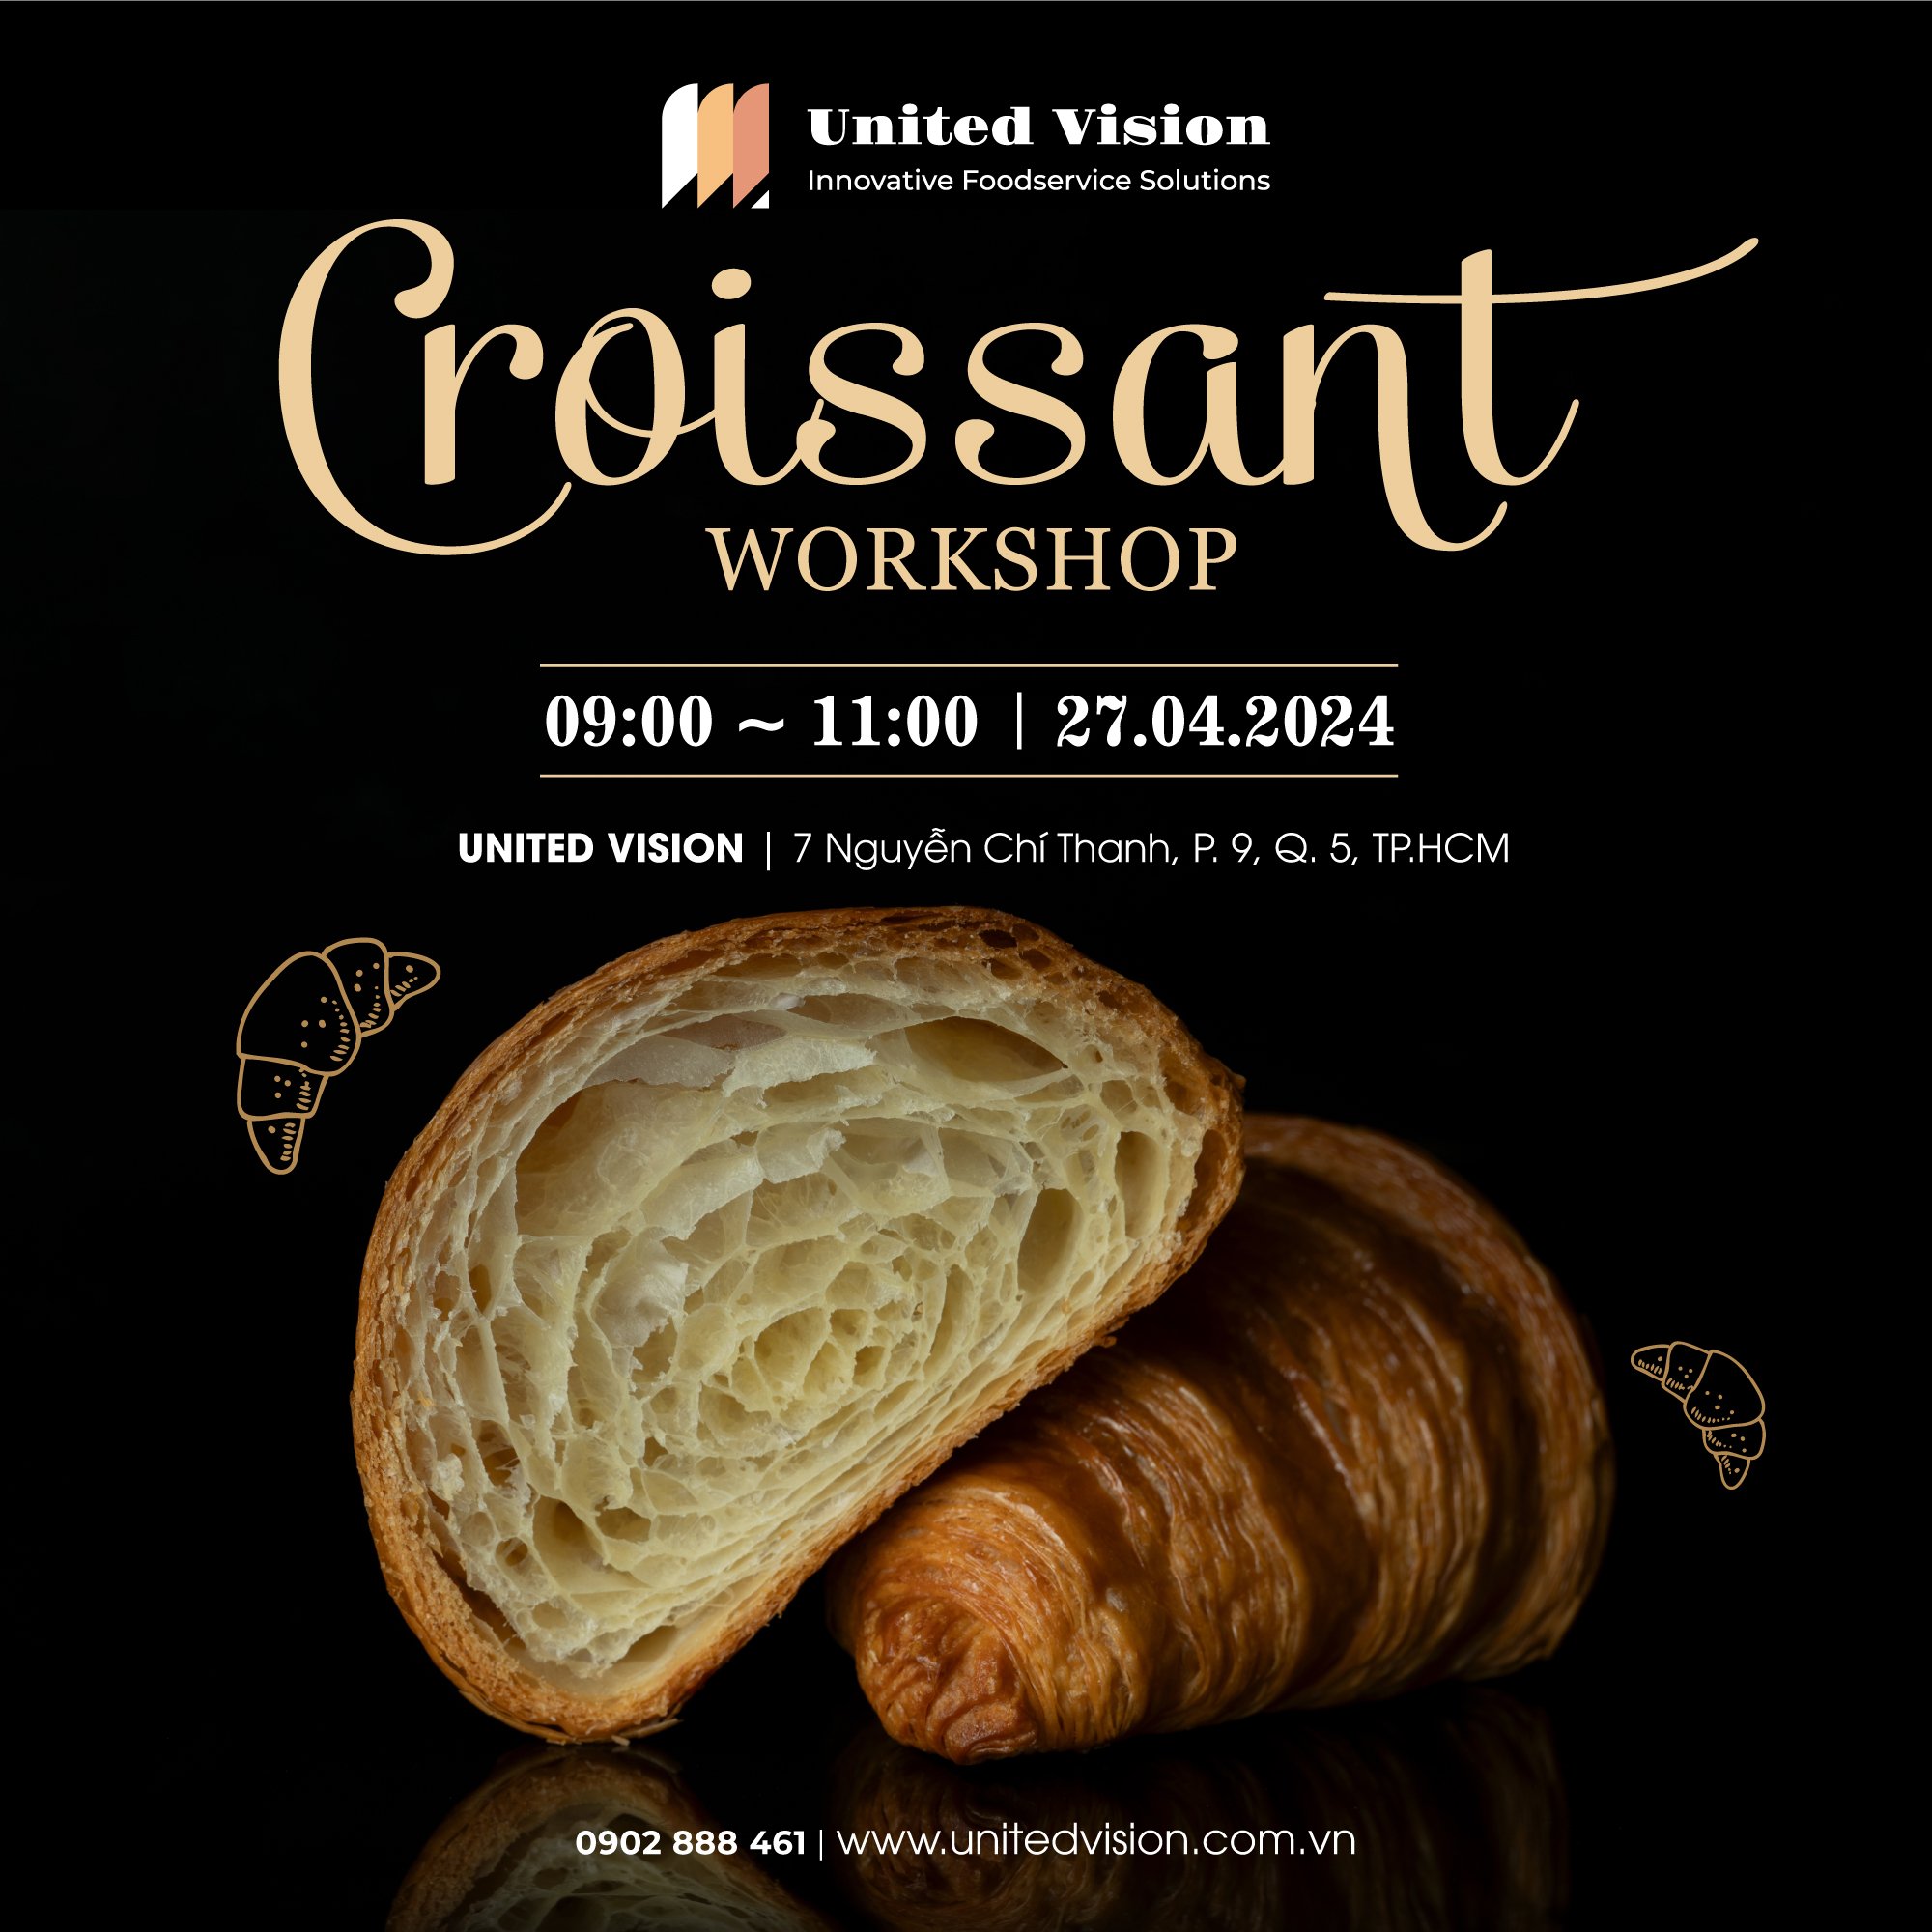 Explore The World Of Croissant With United Vision